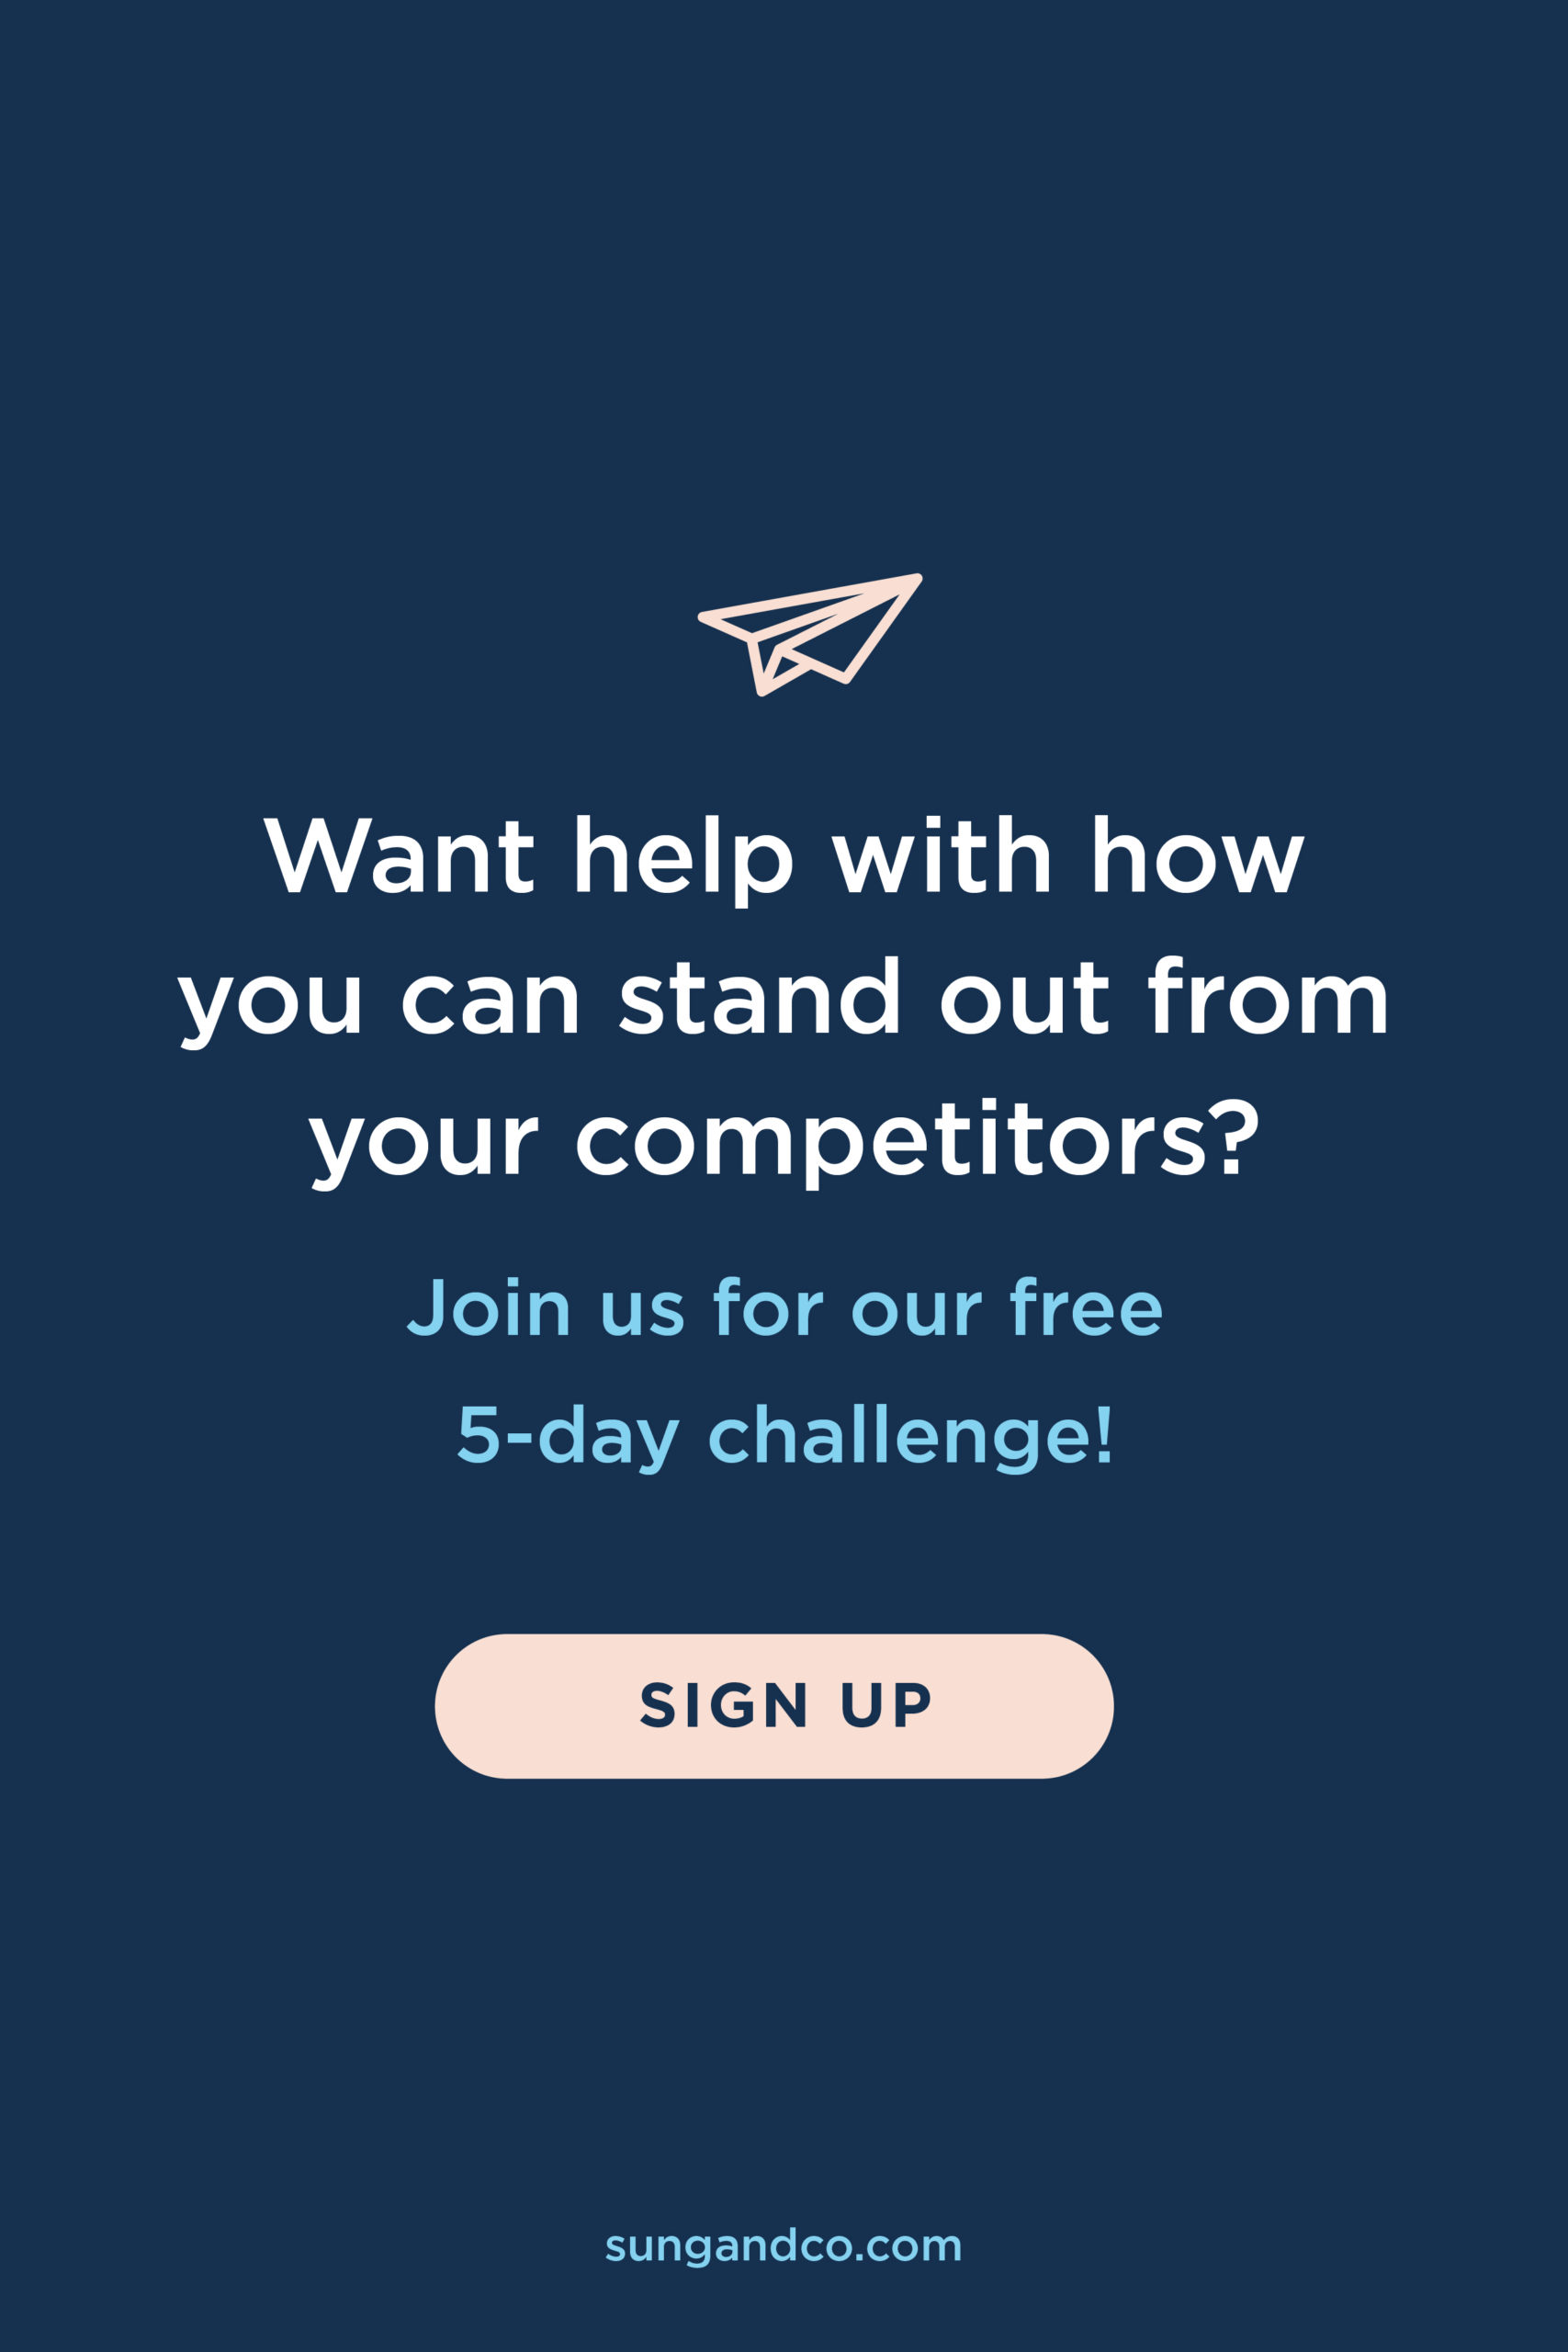 Join the free 5-day challenge for help with standing out from your competition!